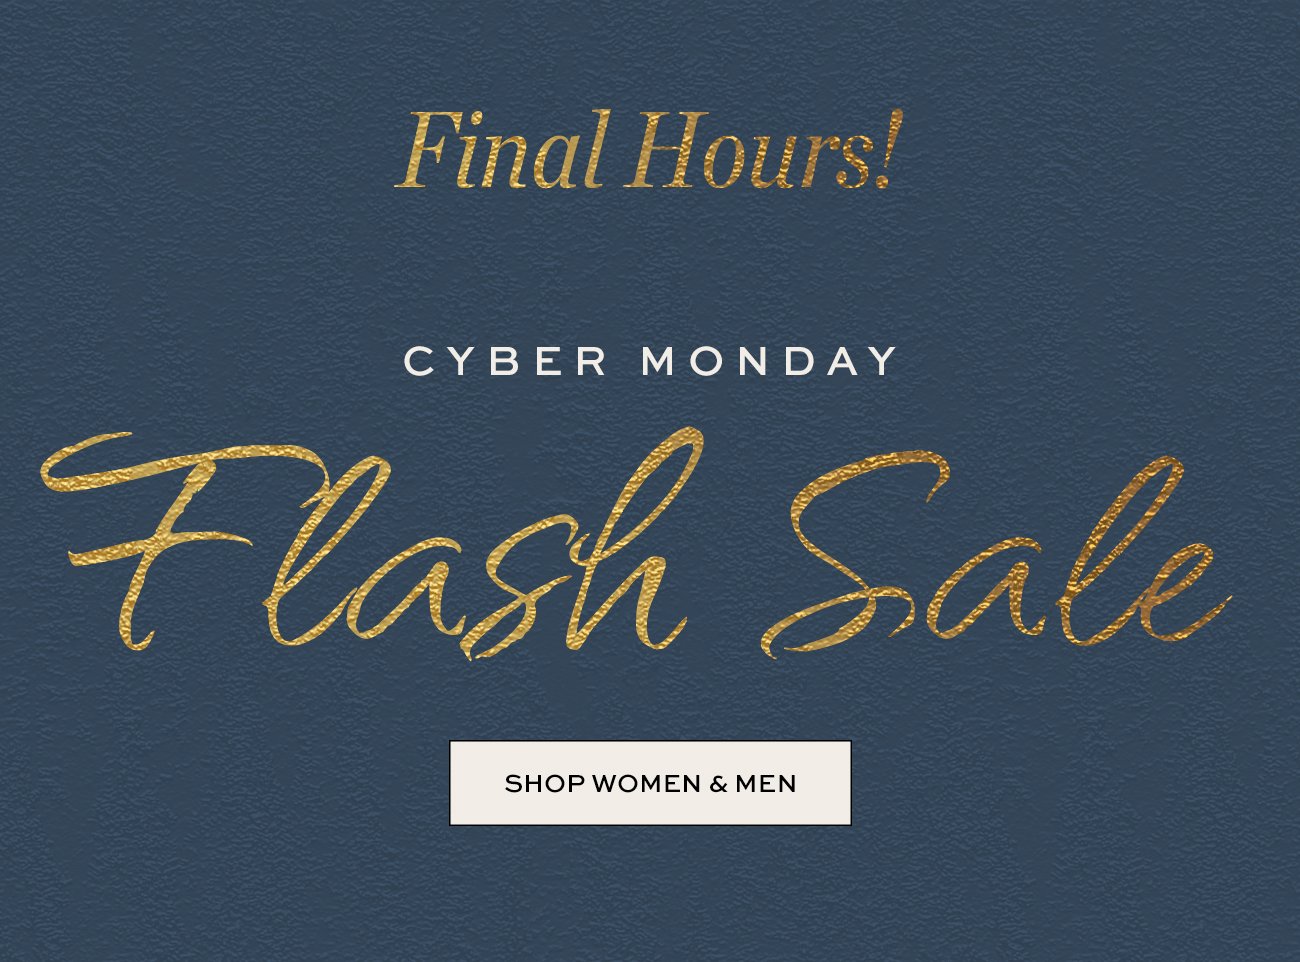 Final Hours! | Cyber Monday Flash Sale